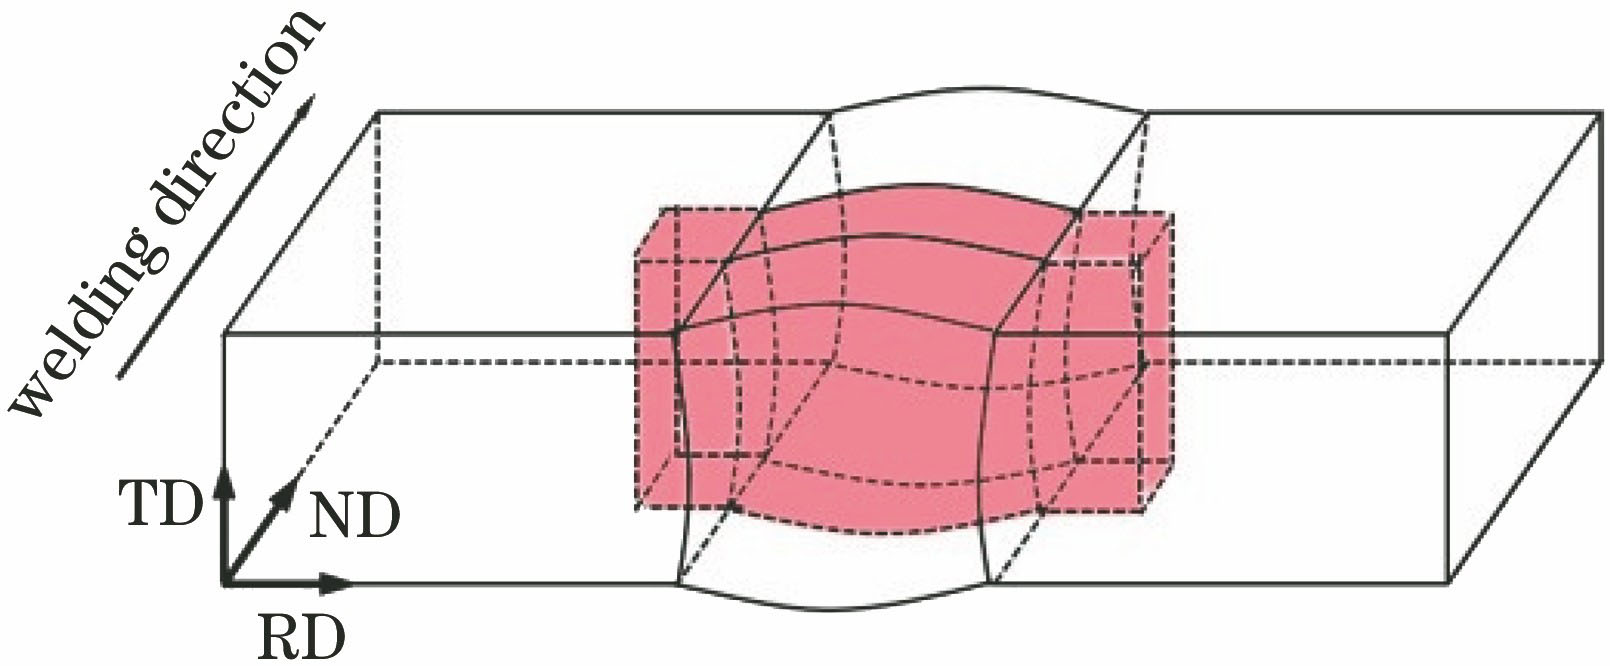 Schematic of sampling position